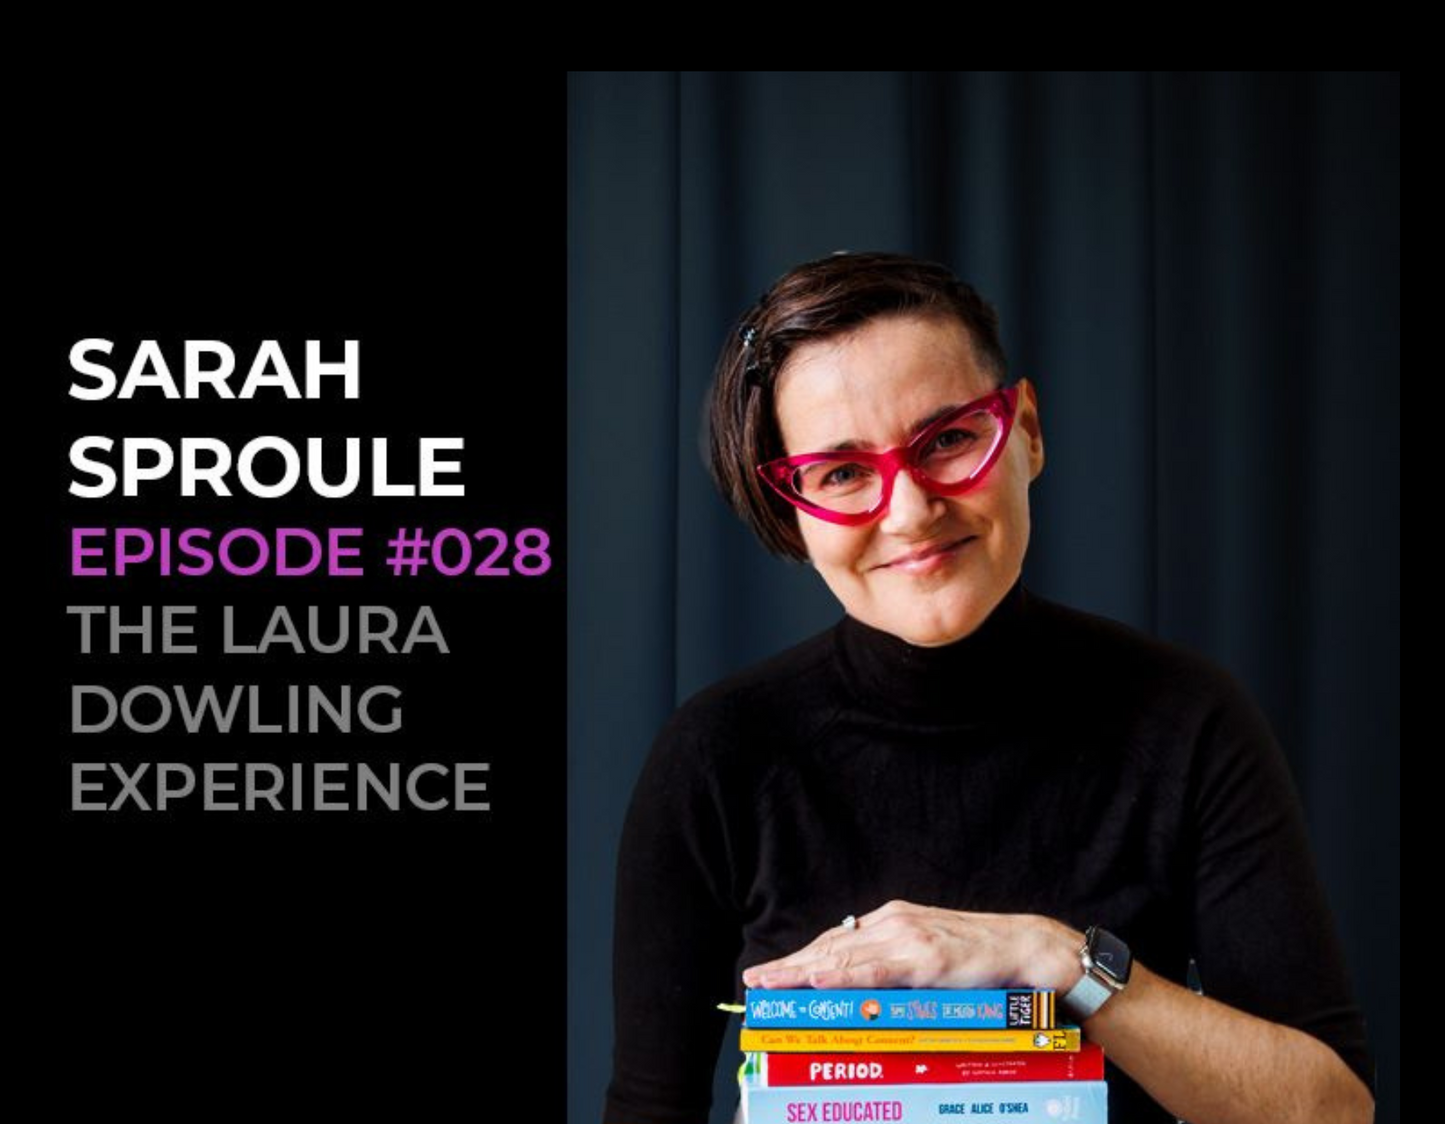 Sarah Sproule- sex, masturbation, genitals and consent- how the hell do we talk to our kids about these topics? Episode #028